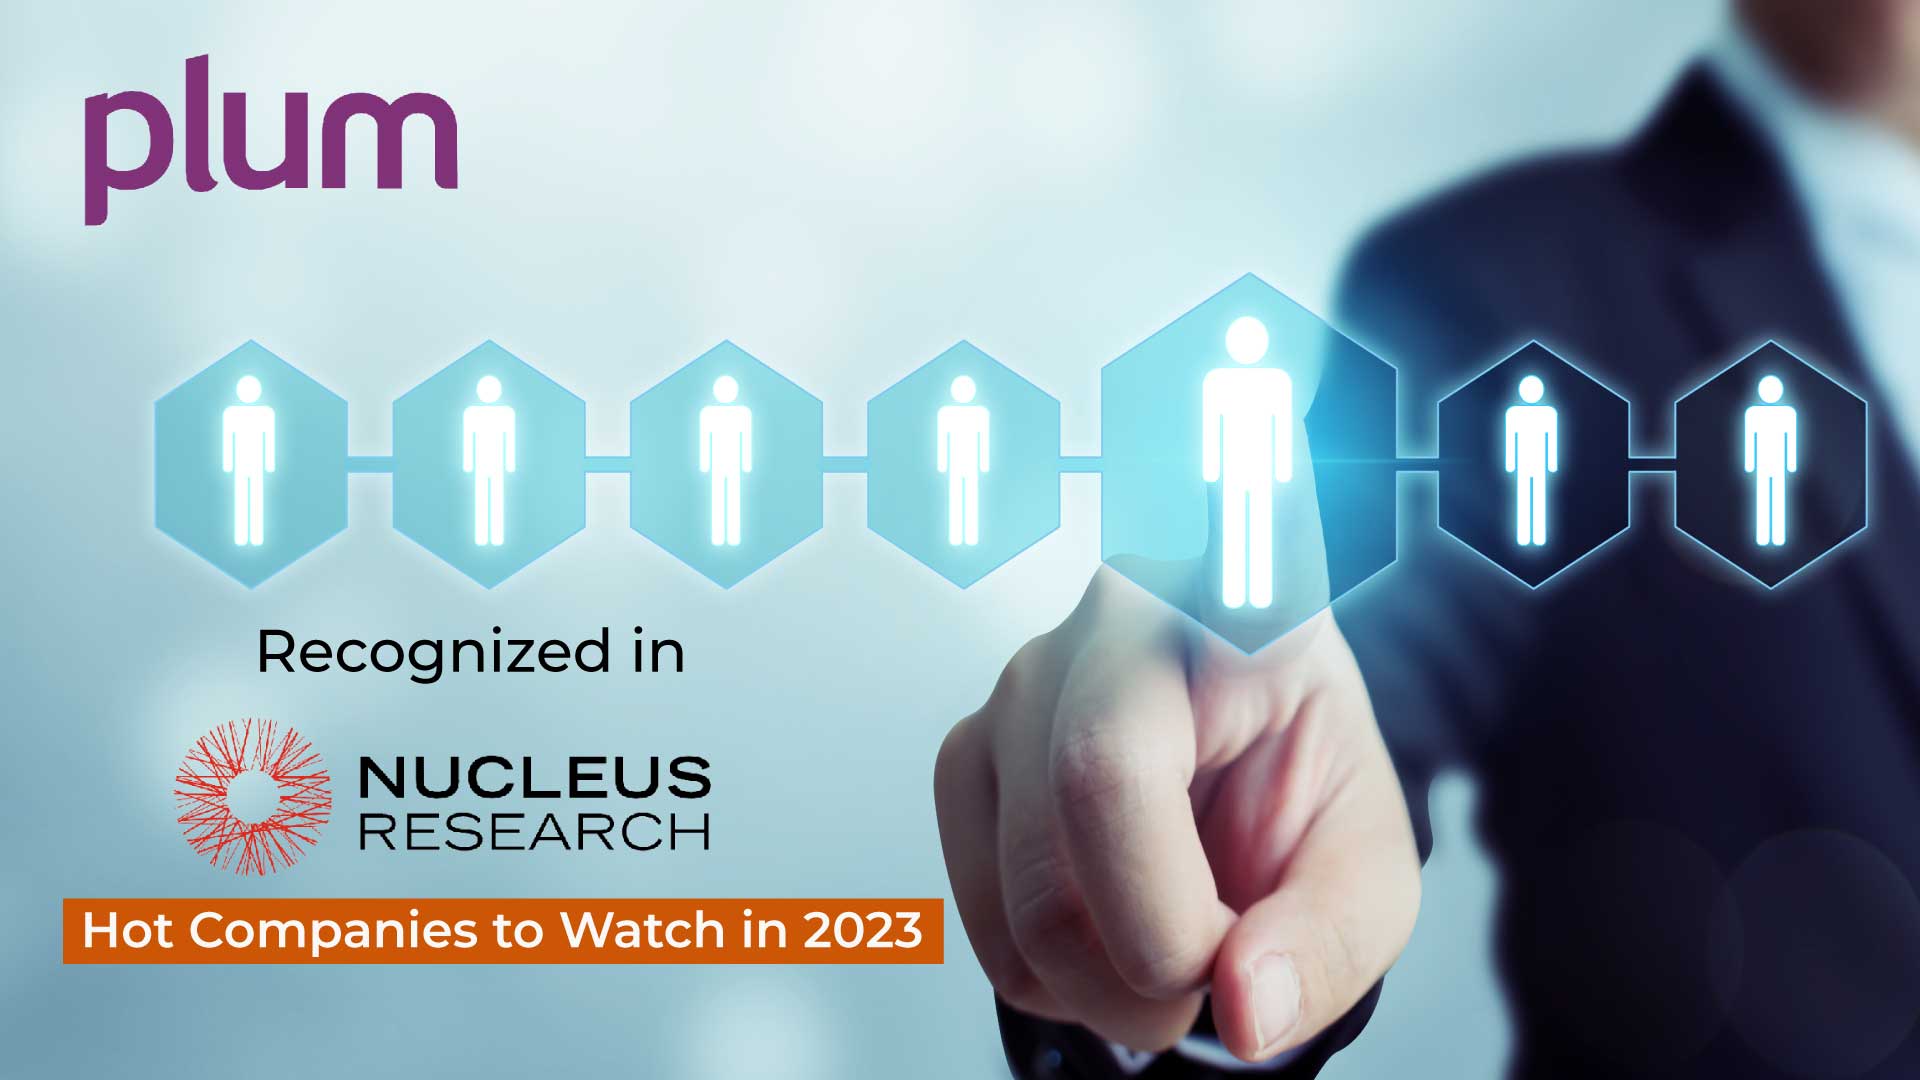 Plum Named a “Hot Company to Watch” in 2023 by Nucleus Research